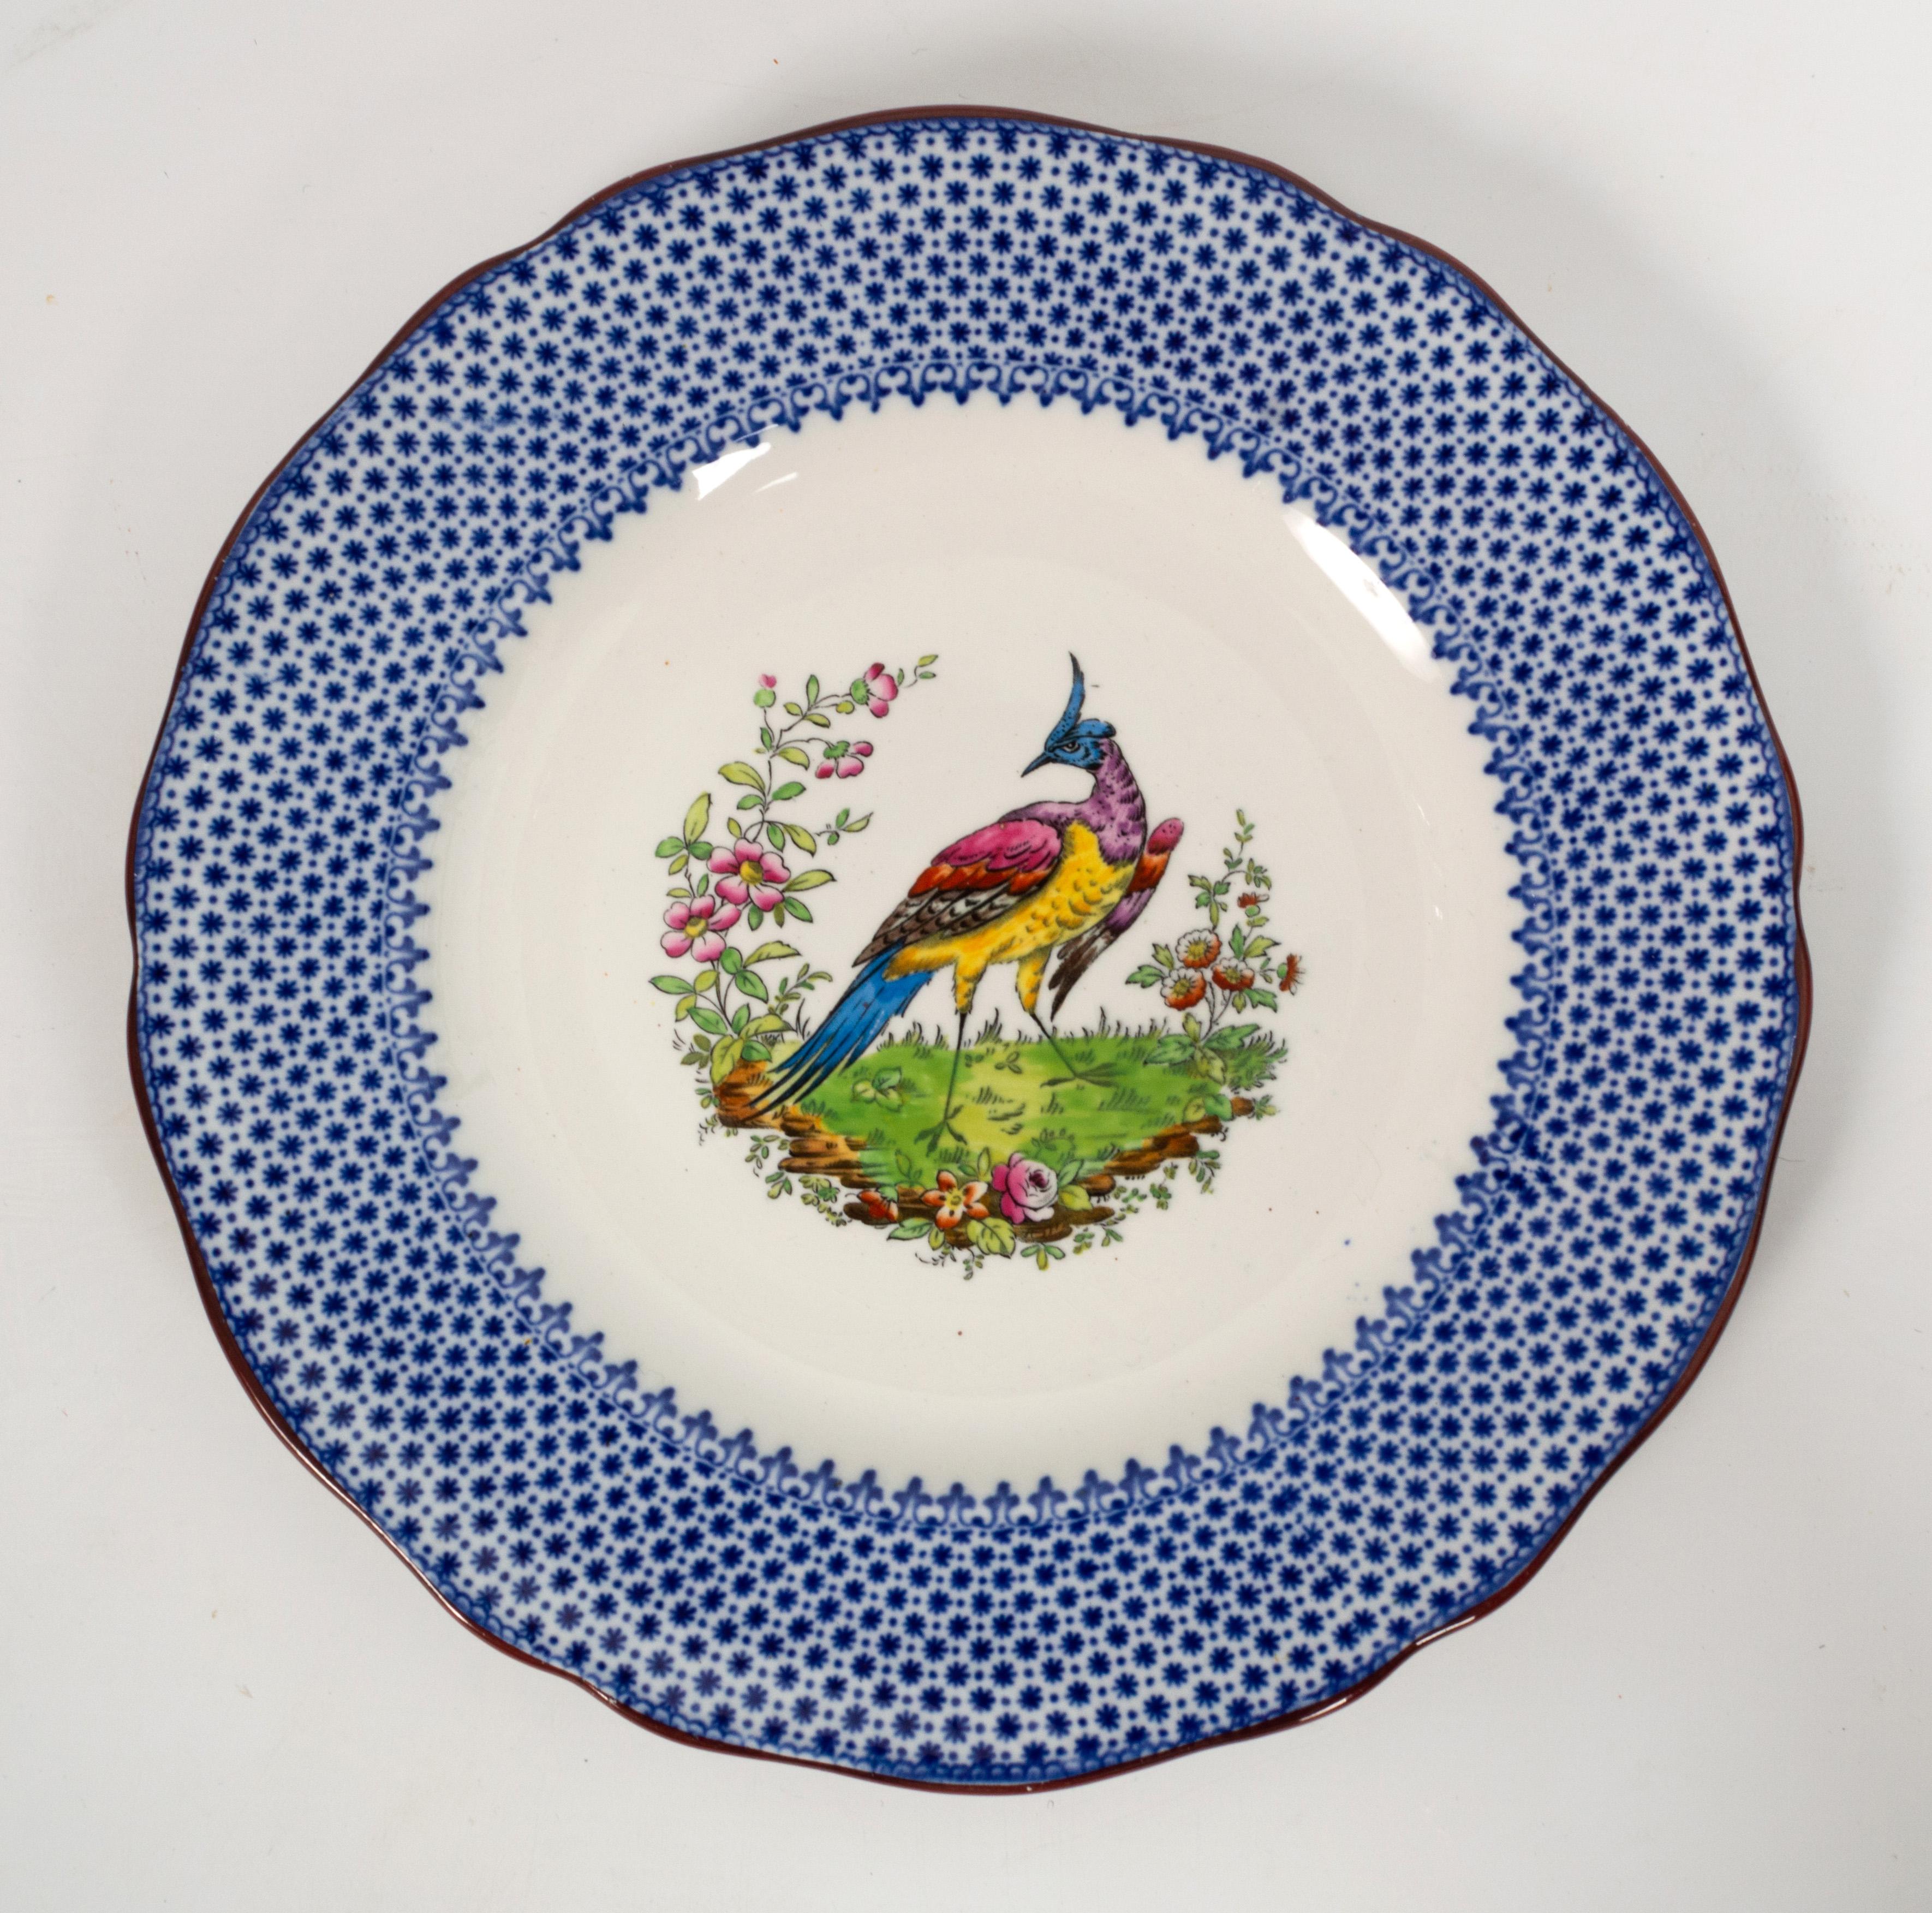 Set 3 Antique English copeland spode chelsea fantasy bird plates circa 1910.

English Bone China Stamped Spode, Copeland, England to base.

In very good condition commensurate of age. A faint hairline crack to base of one plate (please see